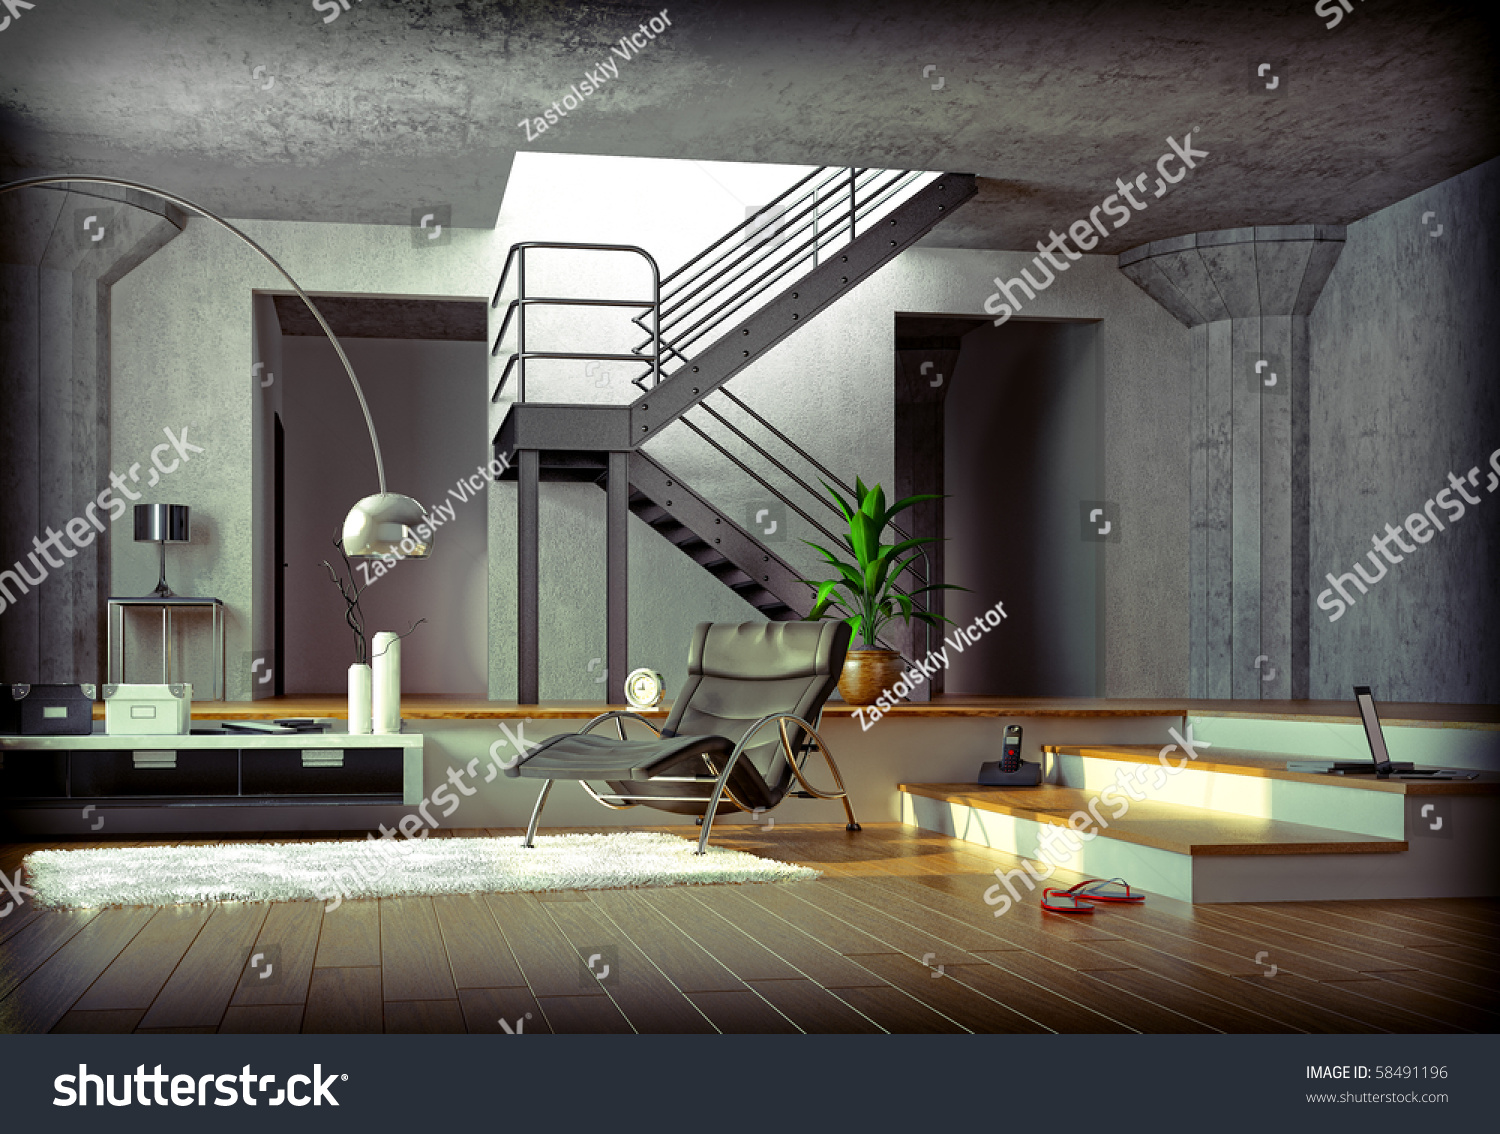 Computer Generated 3d Image Modern Interior Stock ...